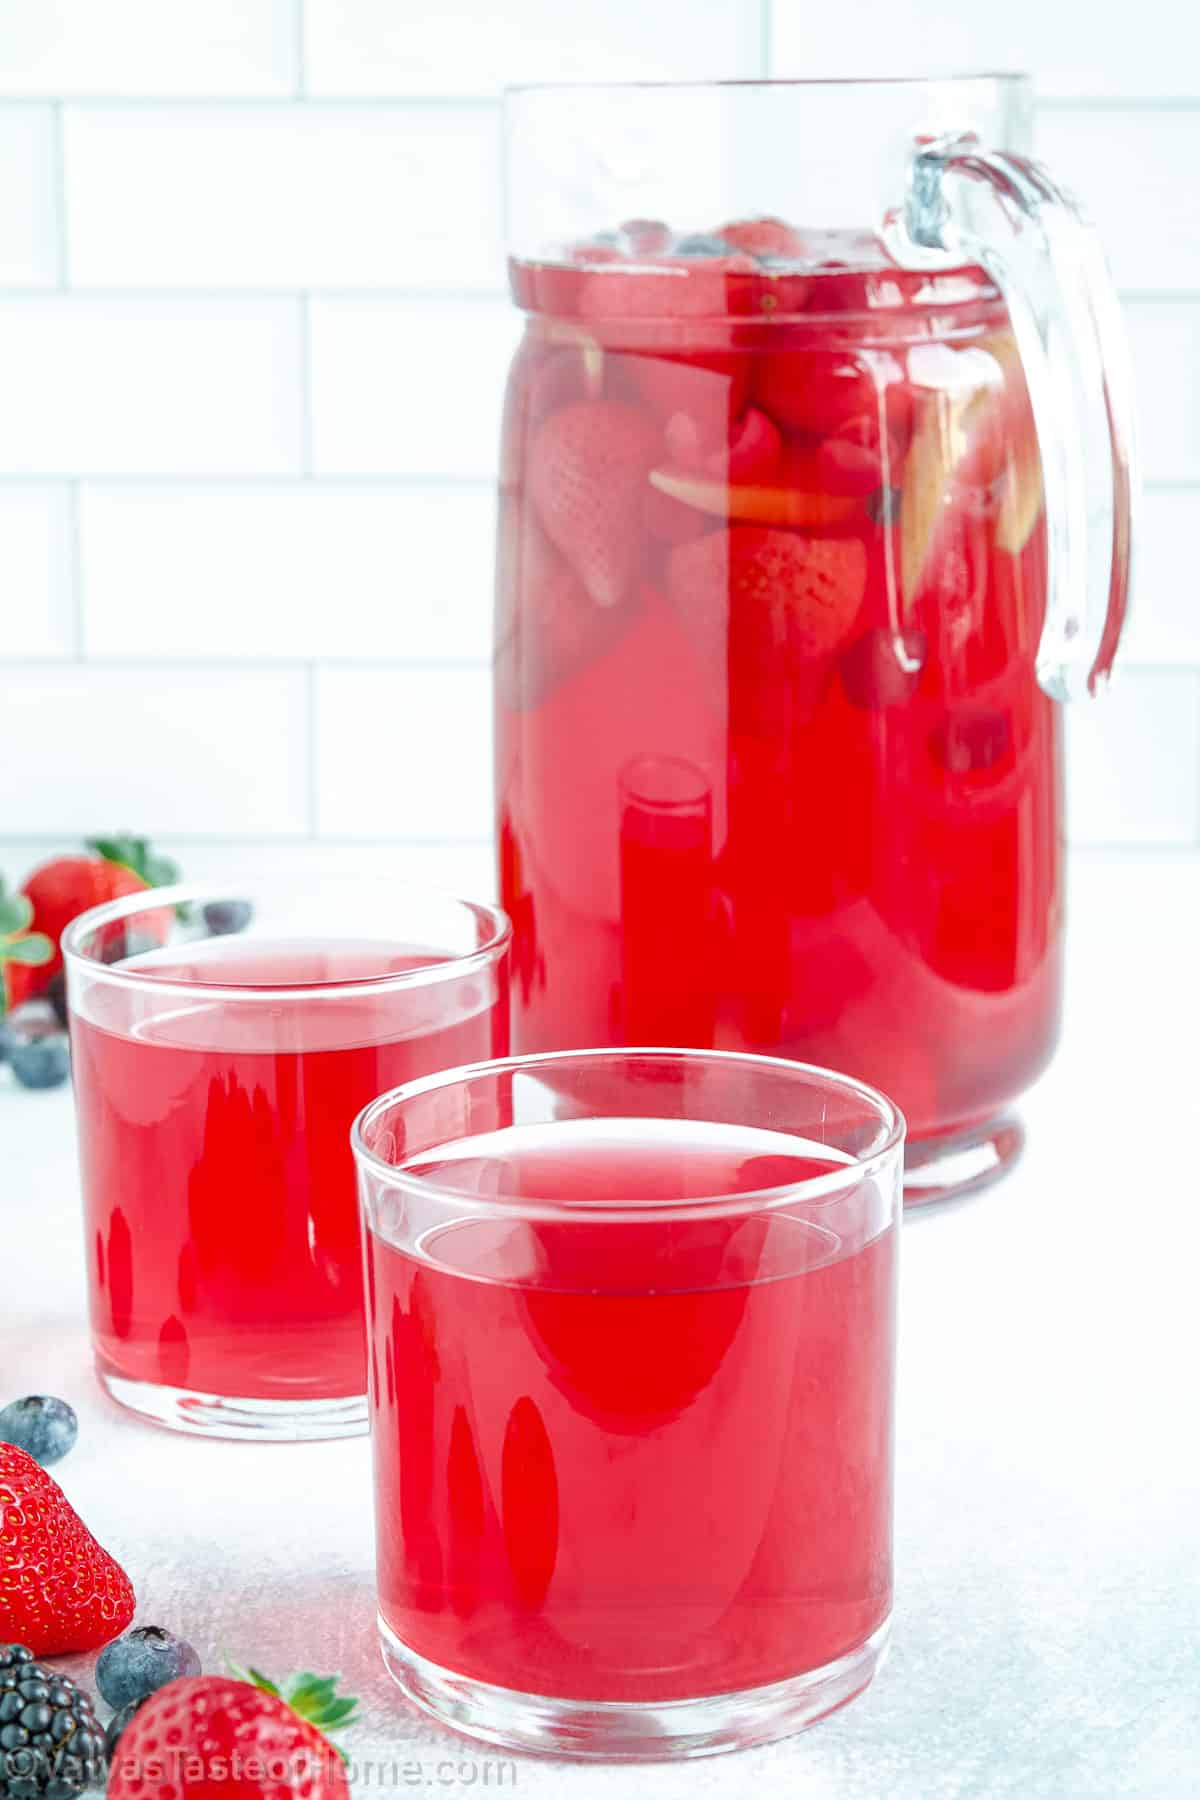 Kompot is a soft drink substitute for juice, made by cooking fruits in a large volume of water. This drink is very popular in Eastern Europe (and in my house) and can be served warm or cold. 